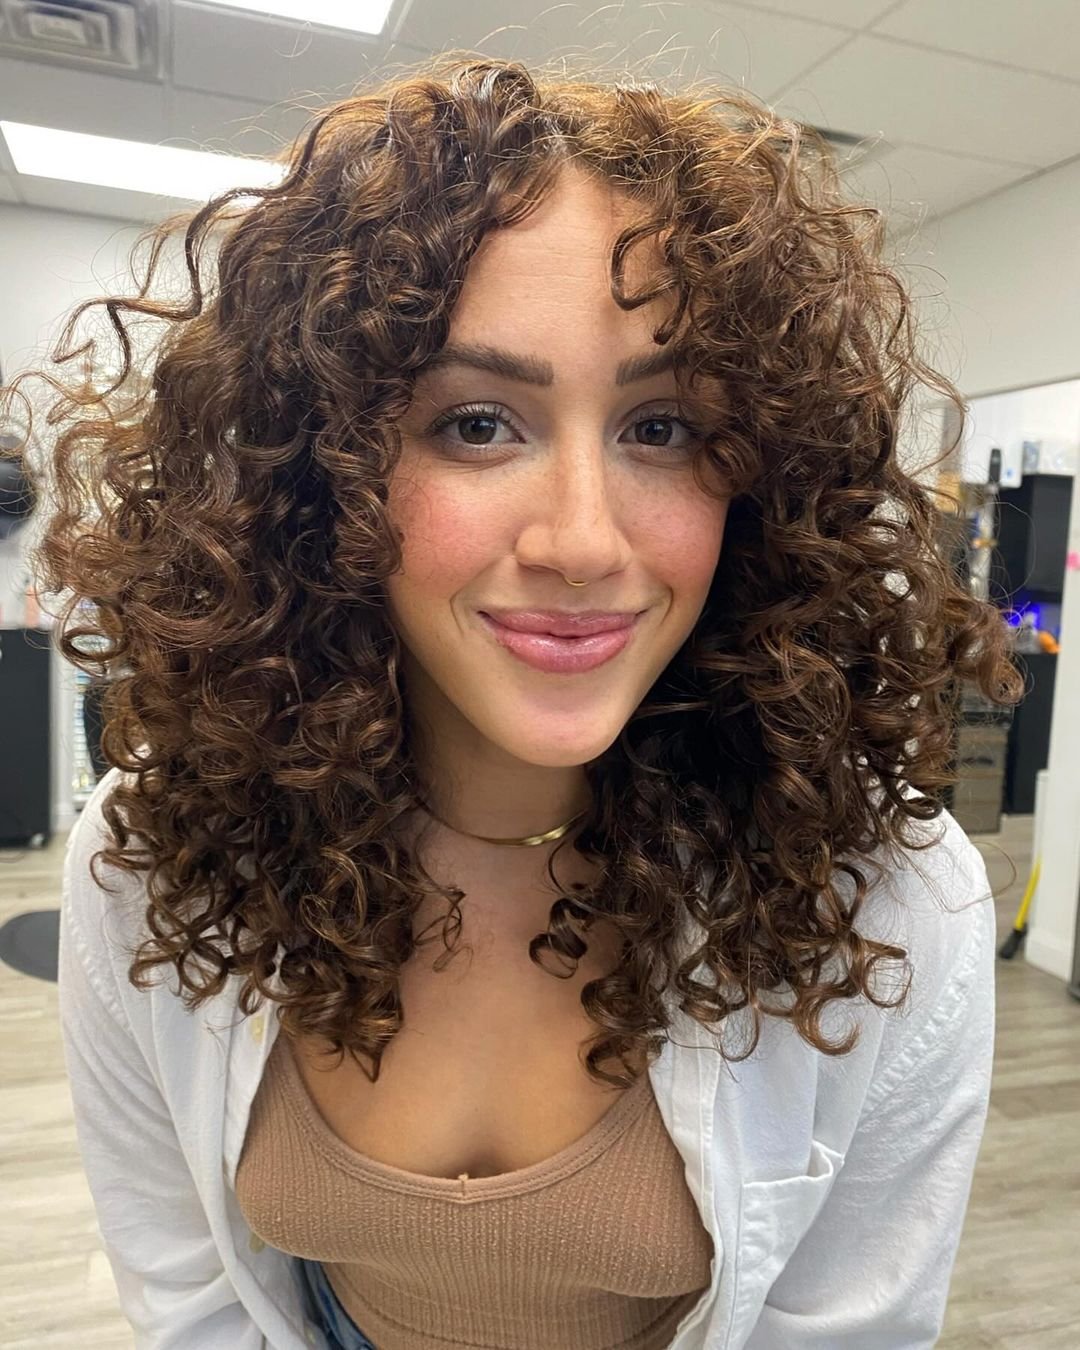 7 - Picture of Curly Hairstyles